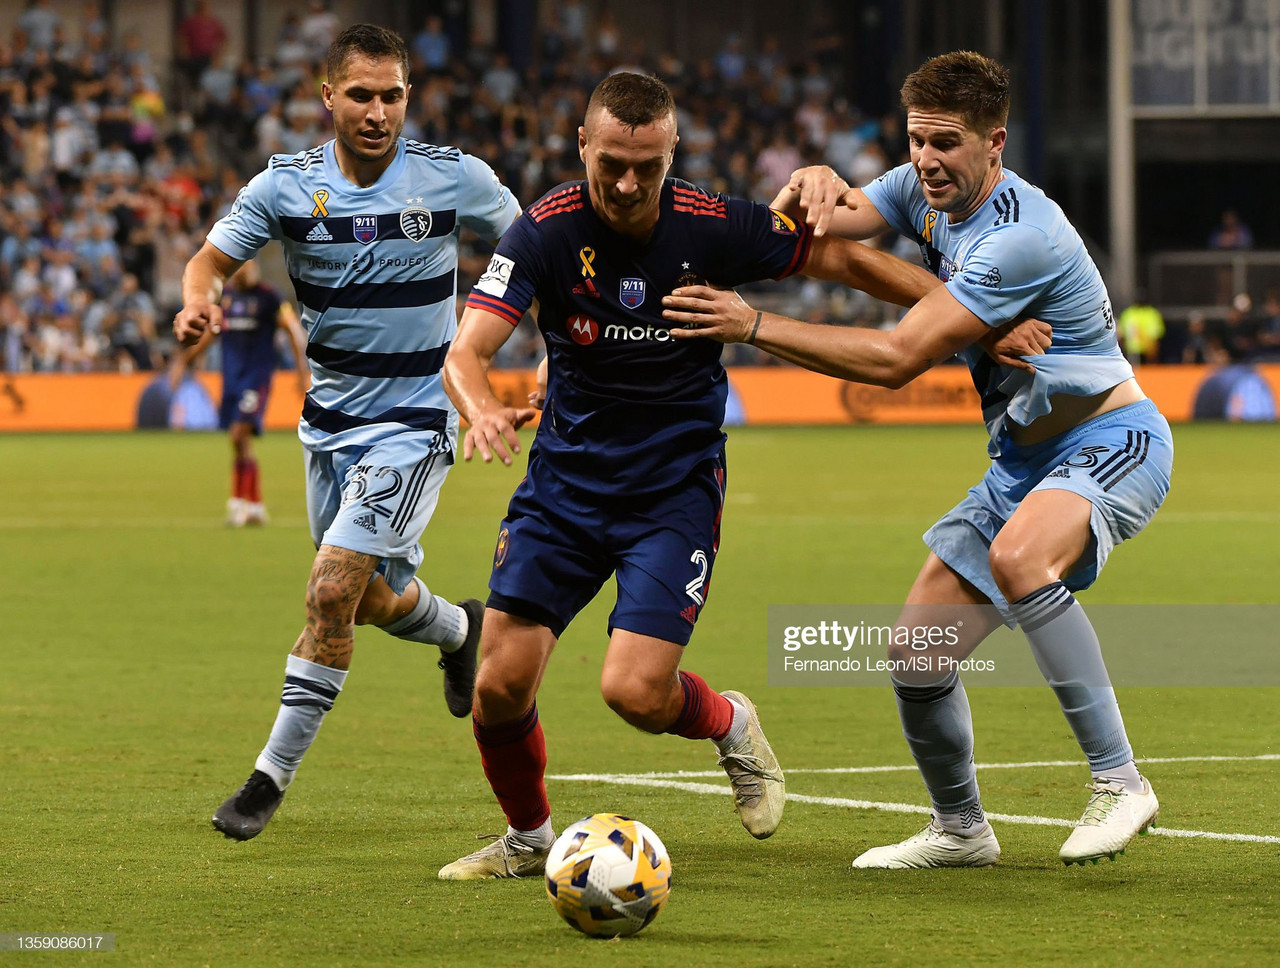 Chicago Fire vs Sporting Kansas City preview: How to watch, kick-off time, team news, predicted lineups, and ones to watch